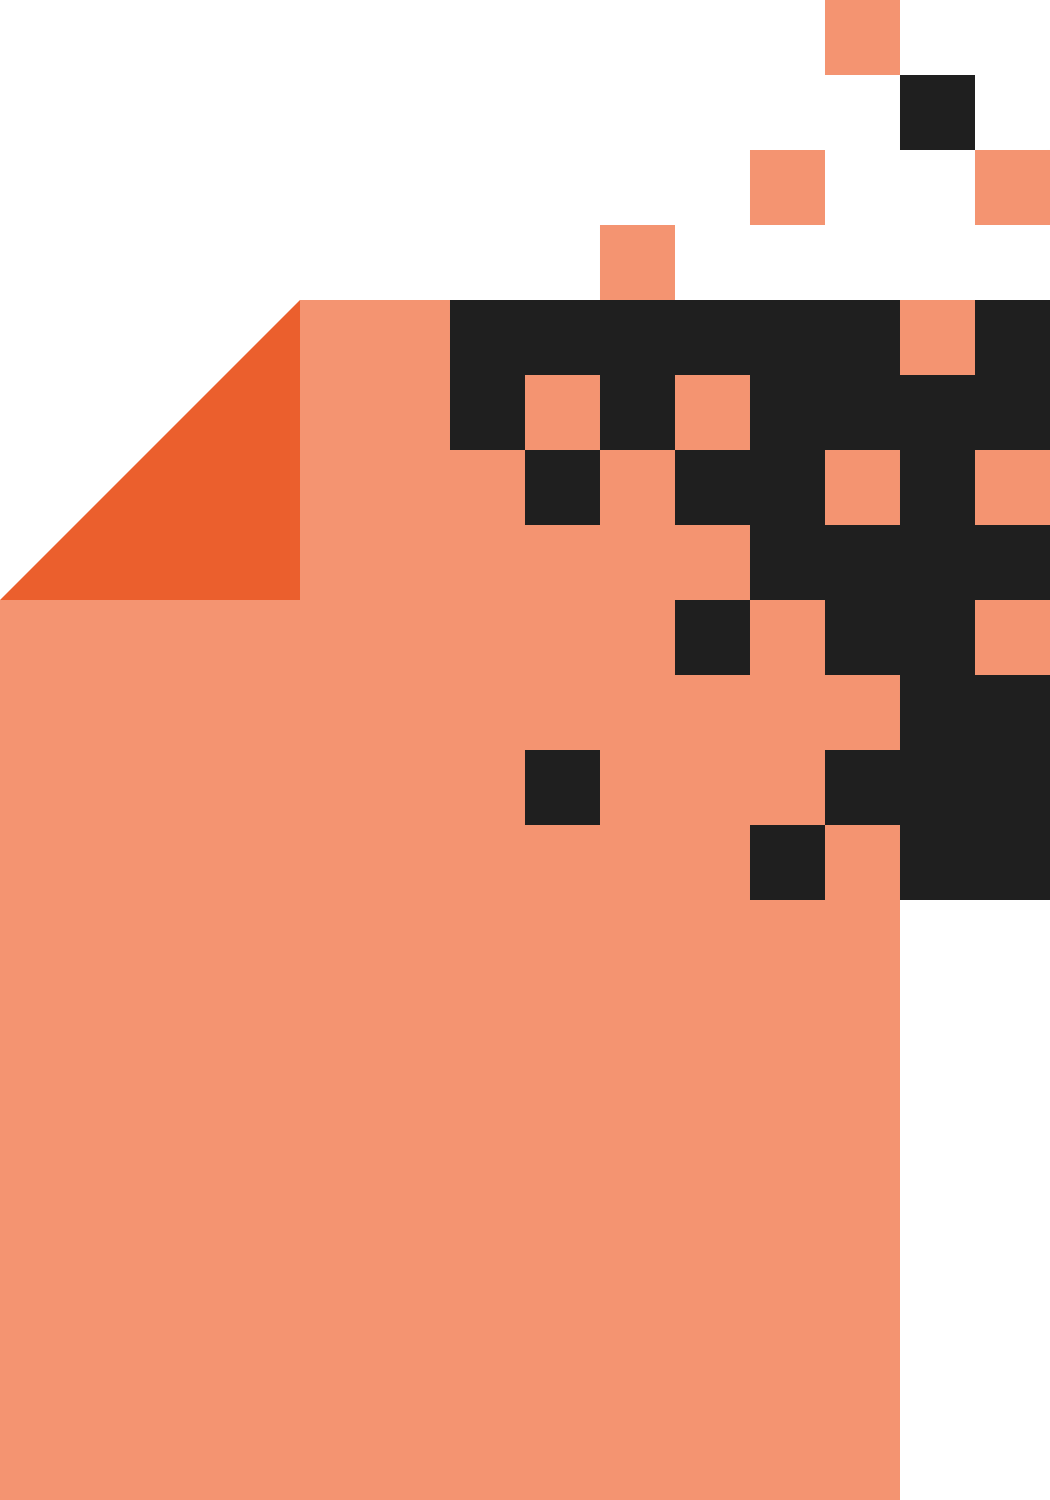 Paper icon representing a loan application dissolving into pixels